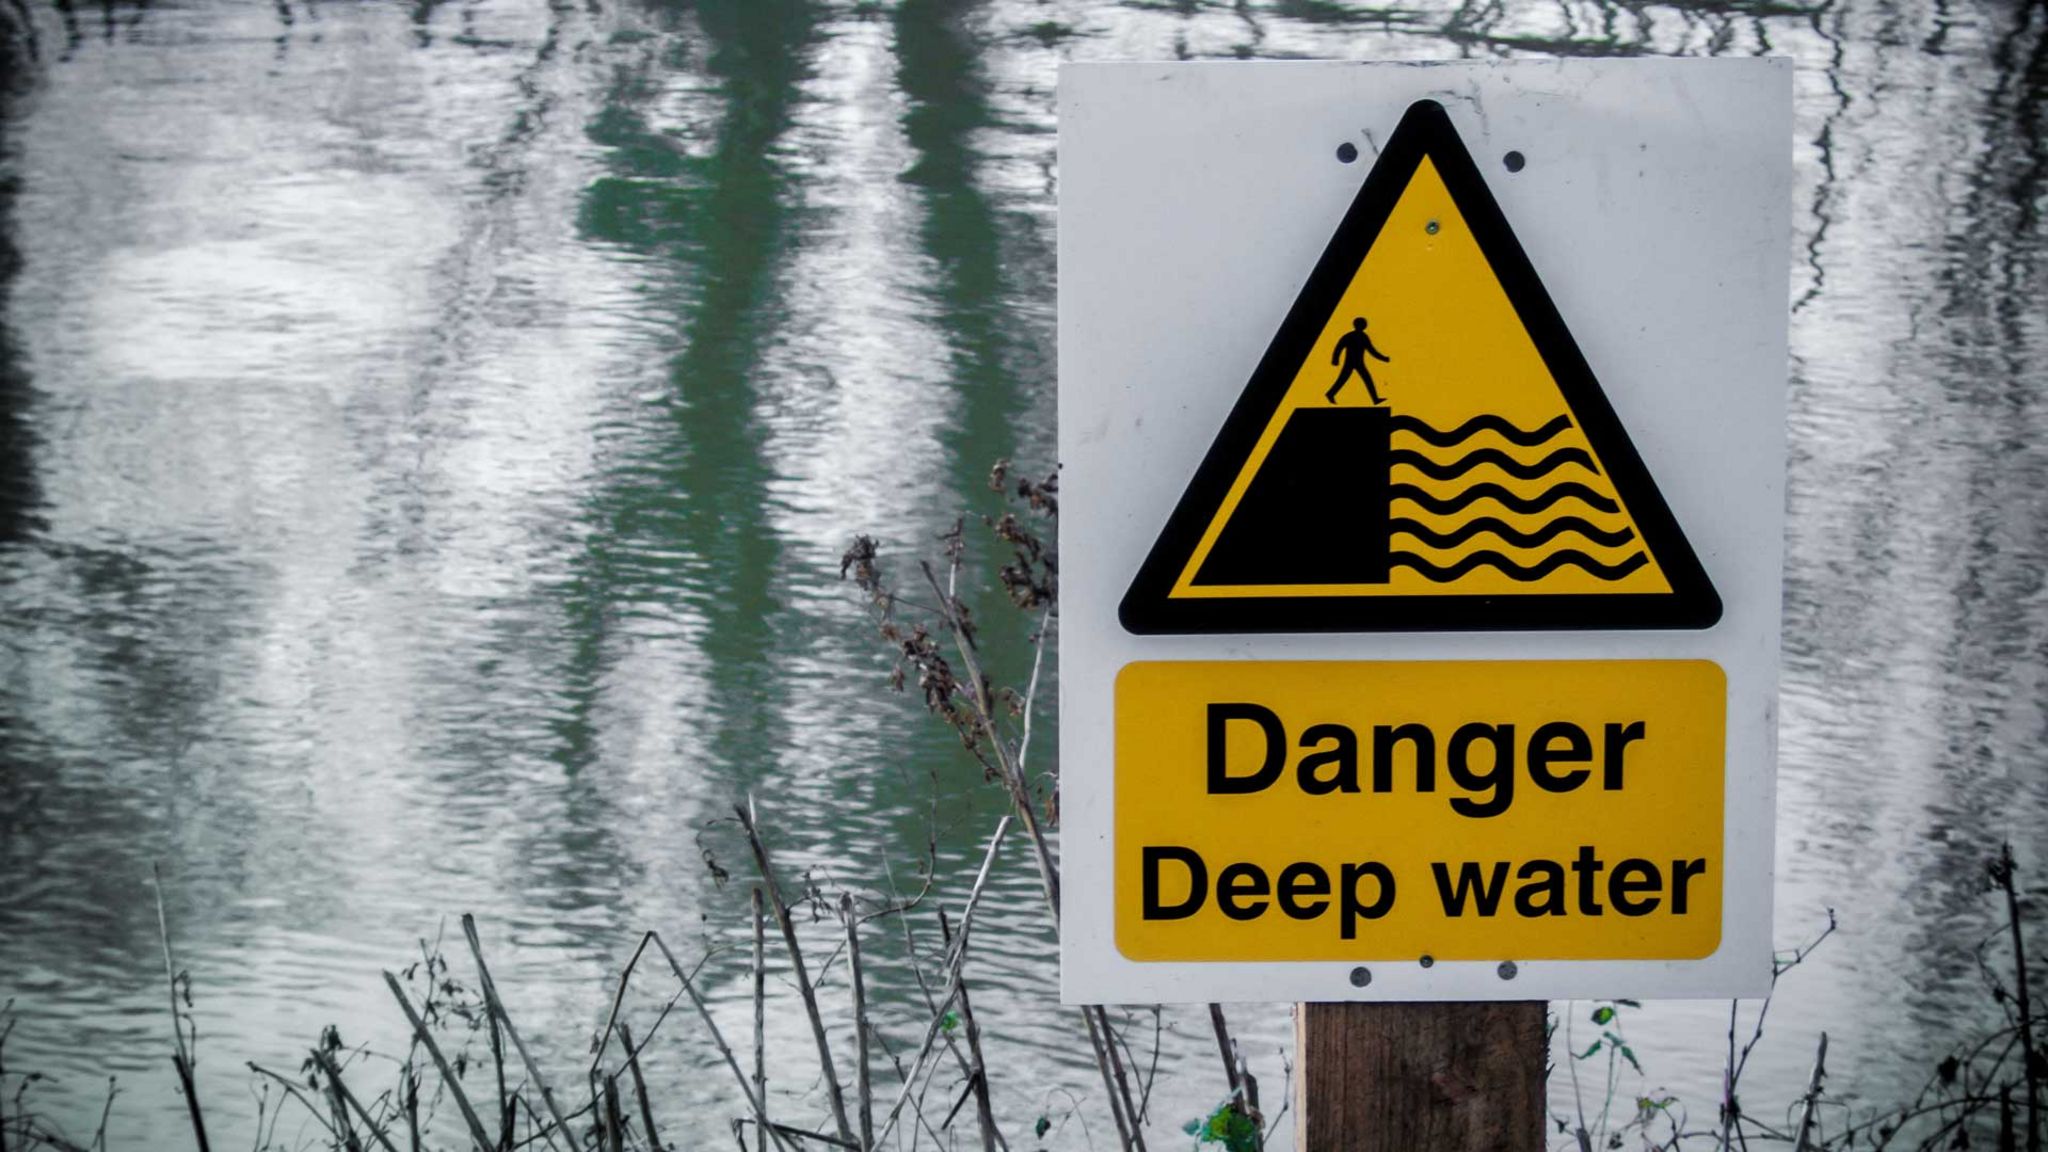 Sign reading "Danger Deep Water" by a lake